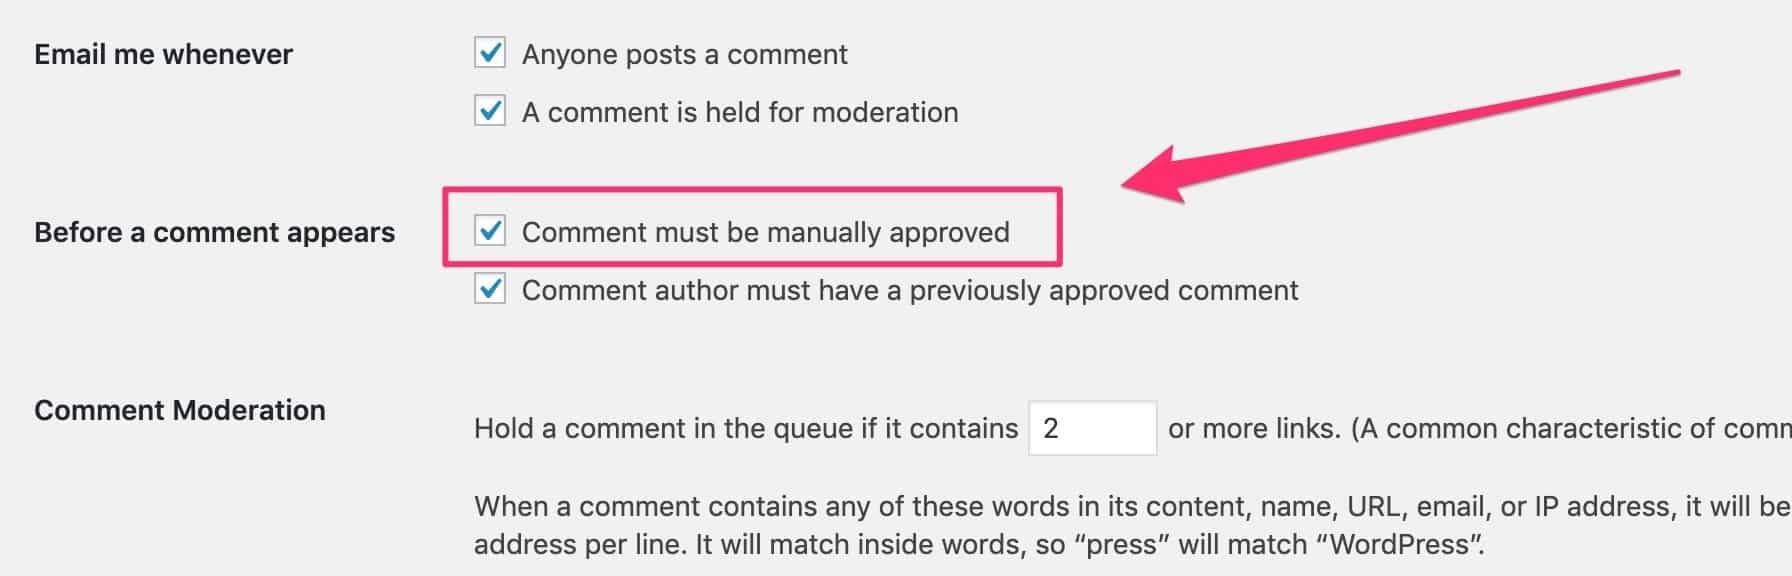 manual approval for commenst